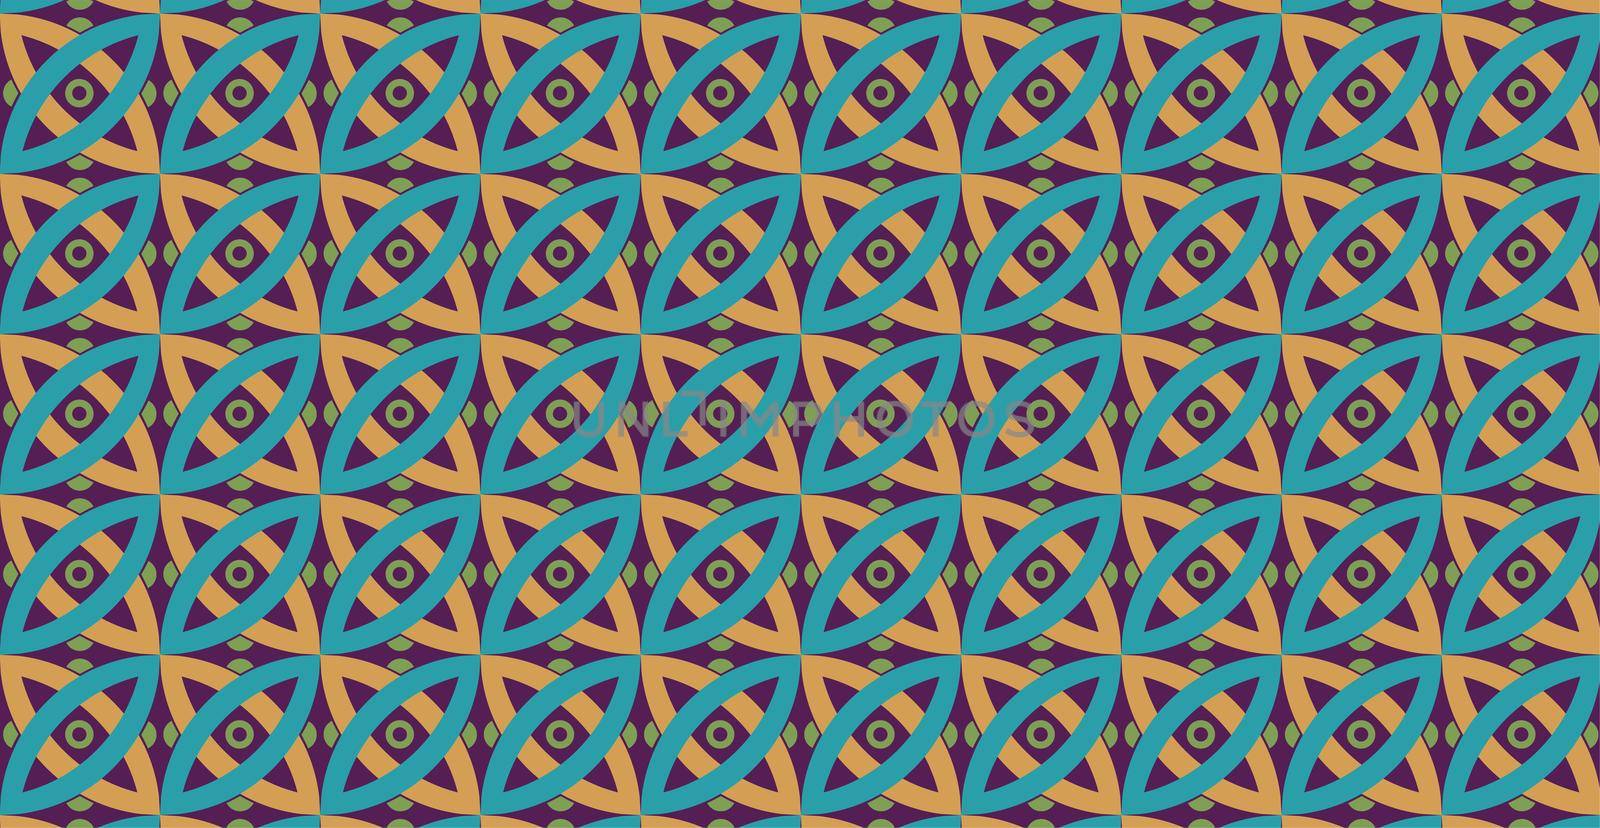 Abstract geometric background. Geometric patterns in different colors. Geometric art print. Can be used for wallpaper, background, fabric design, textile, wrapping paper, digital paper, etc.